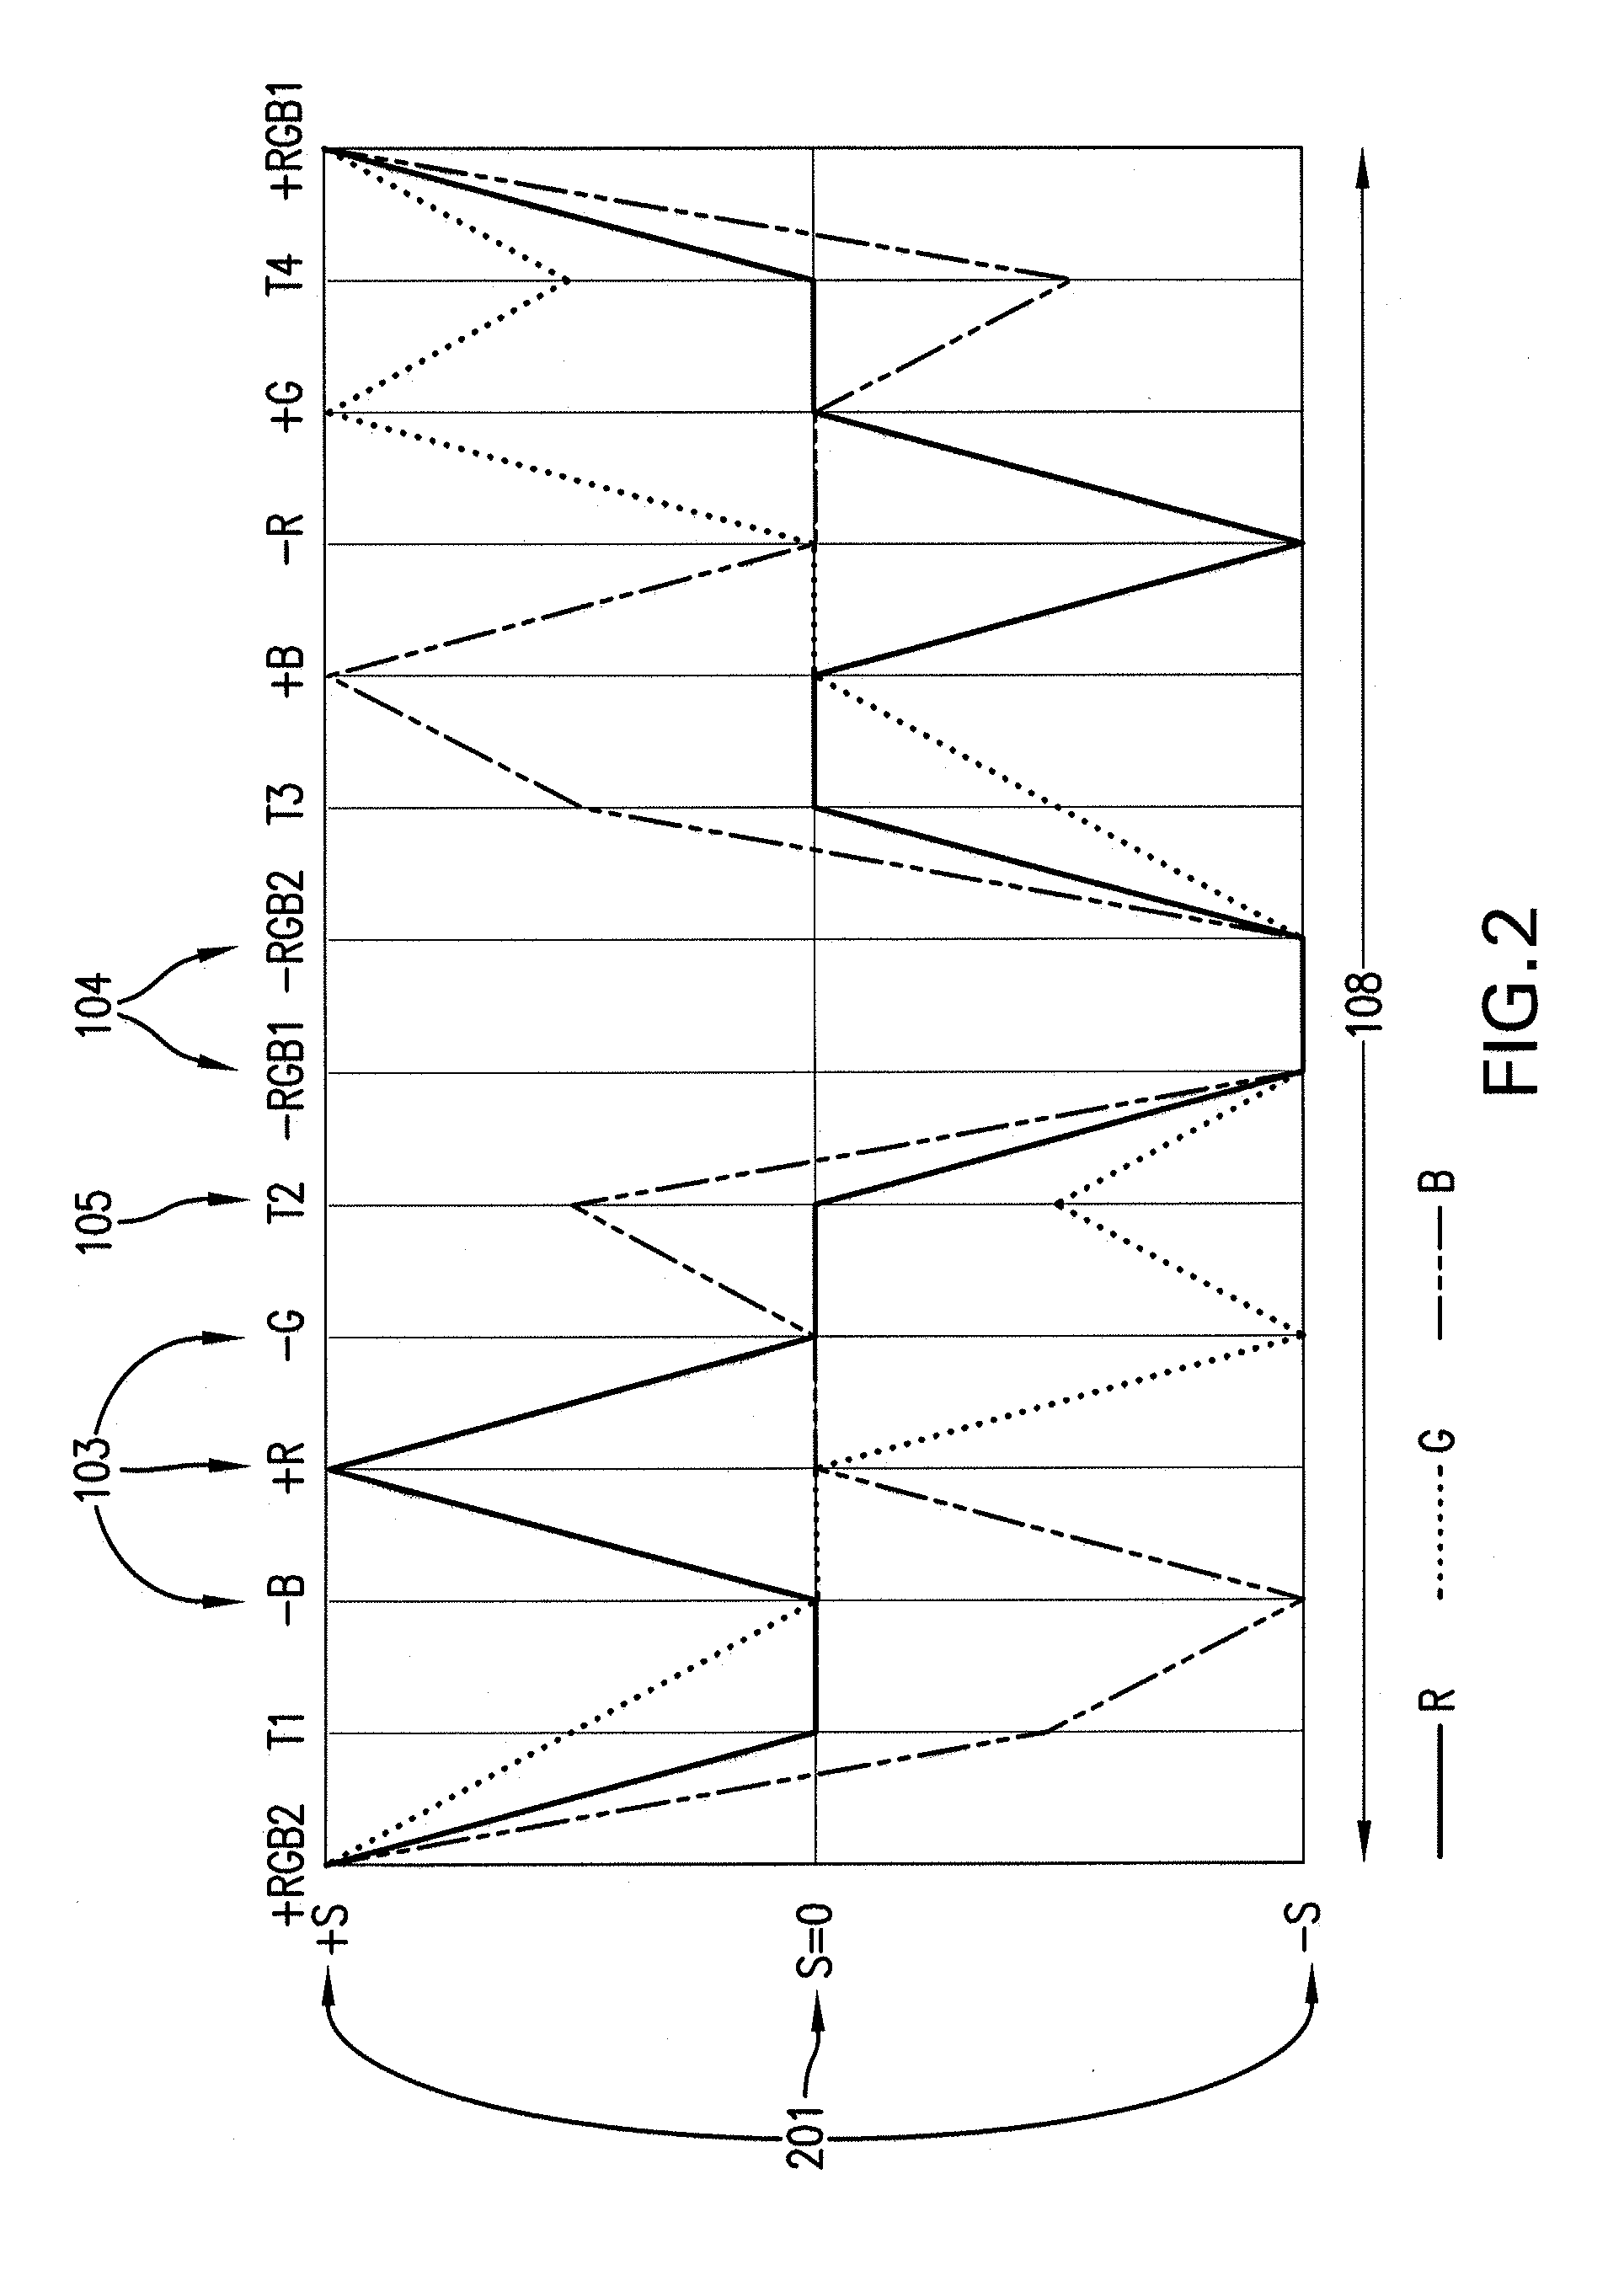 System, method and computer-accessible medium for manipulating a plurality of components using a single gesture or motion